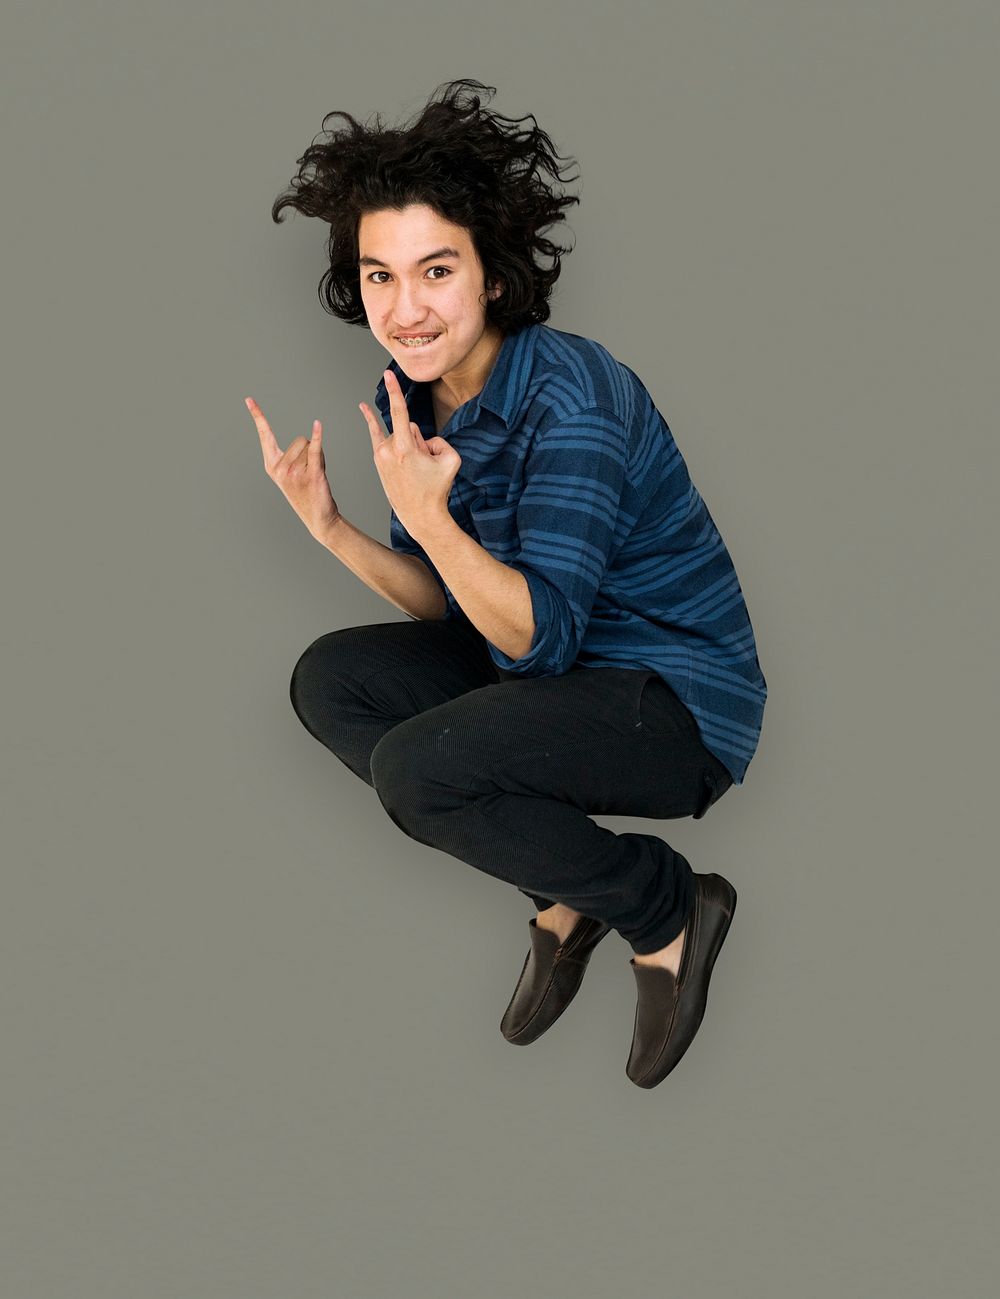 Young Adult Man Jumping Studio Portrait